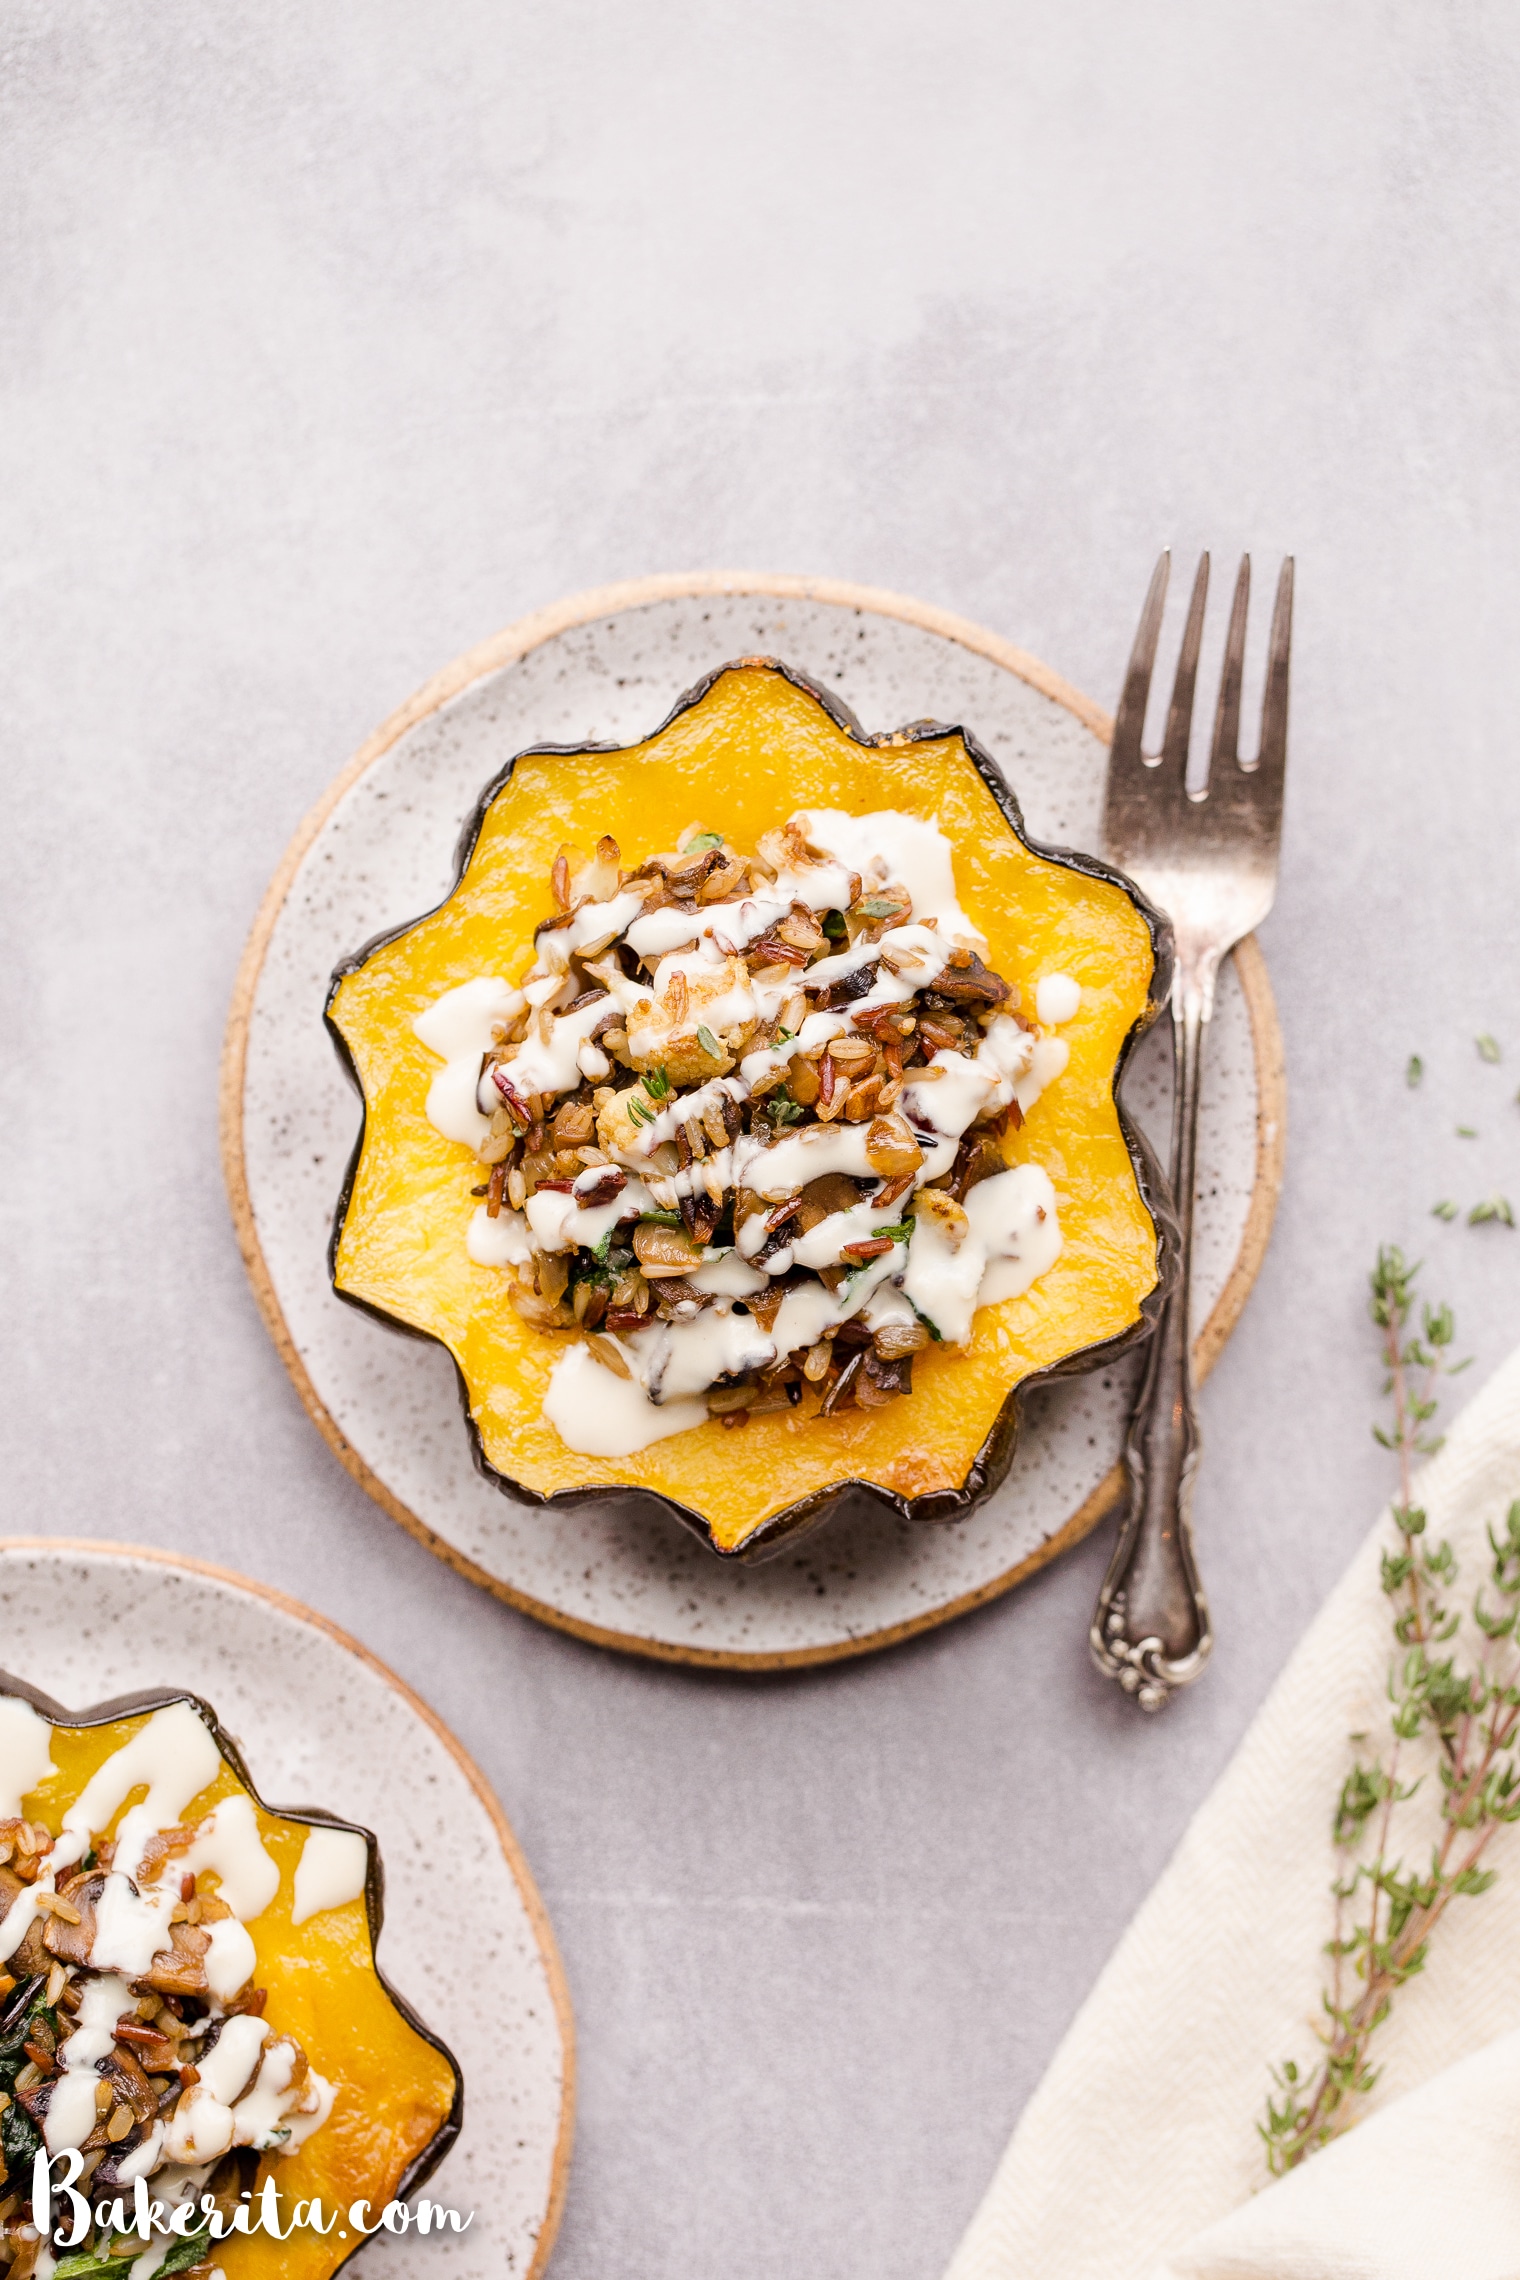 This Mushroom & Wild Rice Stuffed Acorn Squash is filled with caramelized onions, cauliflower florets, spinach, dried cranberries, and pecans. It's served with a drizzle of lemon tahini sauce. This comforting and colorful dish has a variety of texture, tons of flavor, and makes the perfect hearty dinner or side dish.